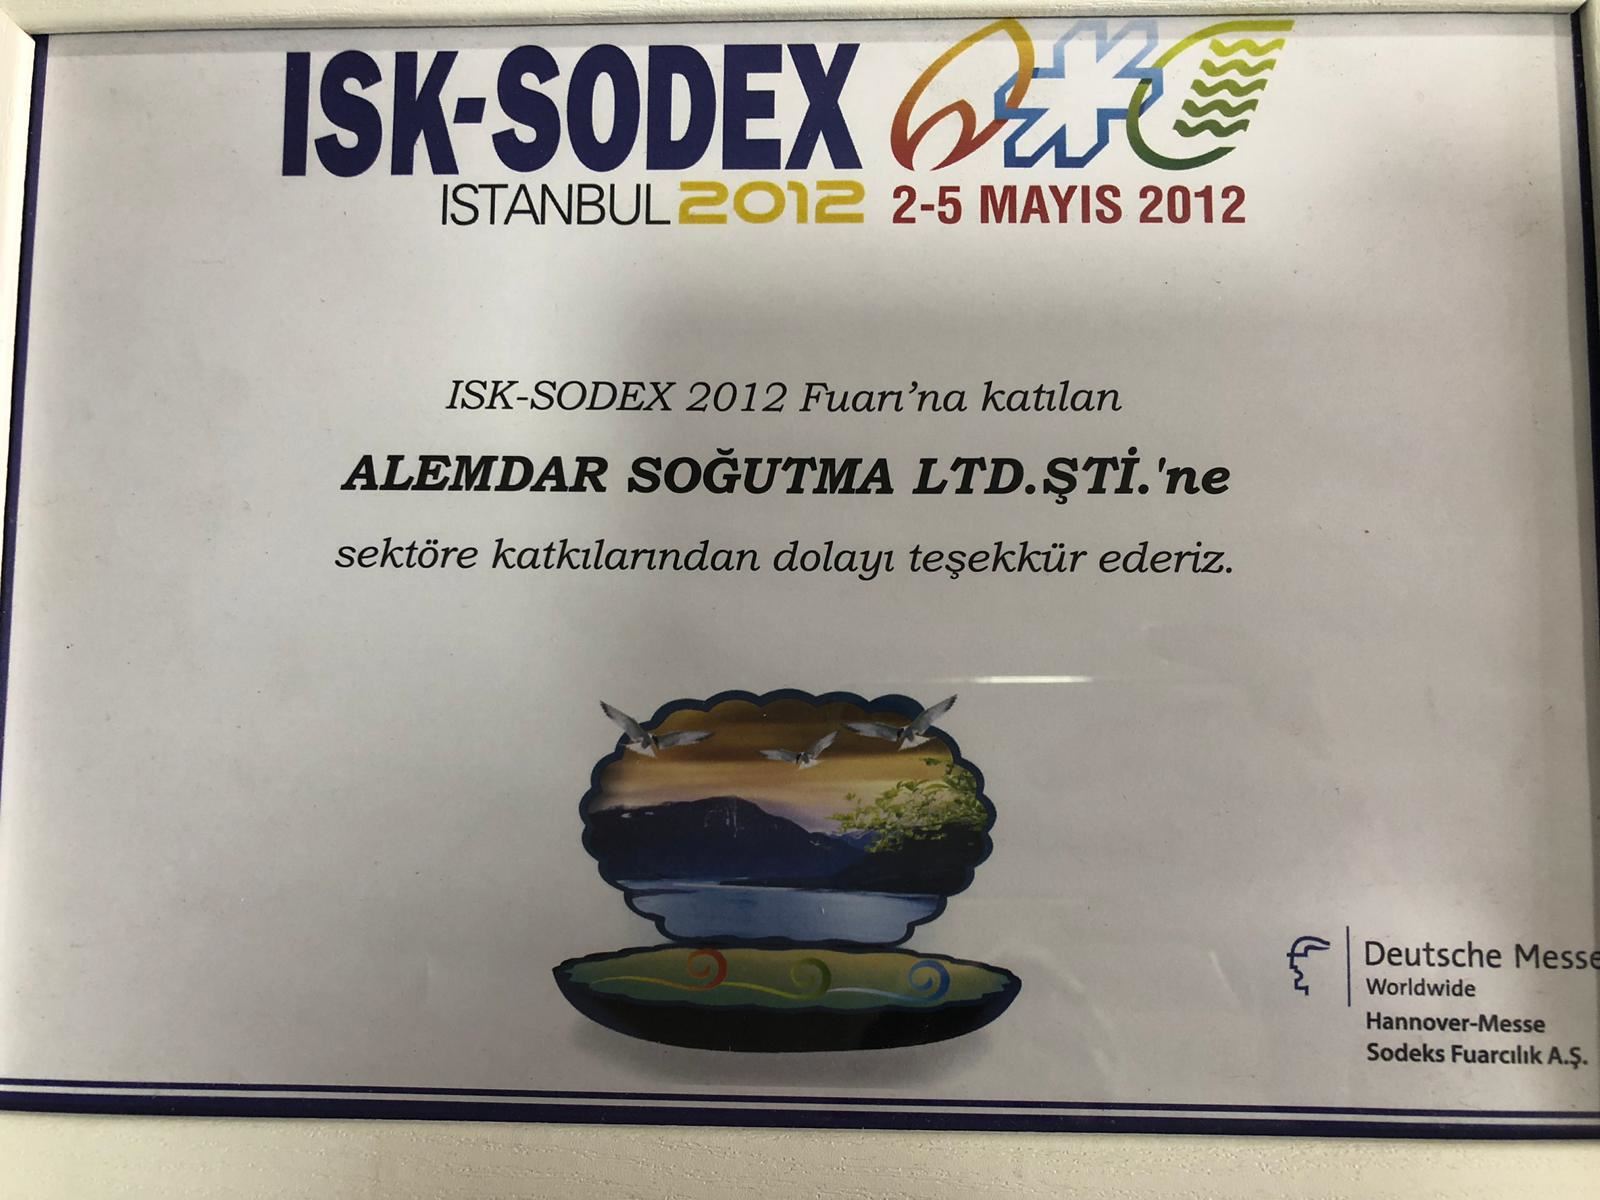 ISK-SODEX İSTANBUL 2012